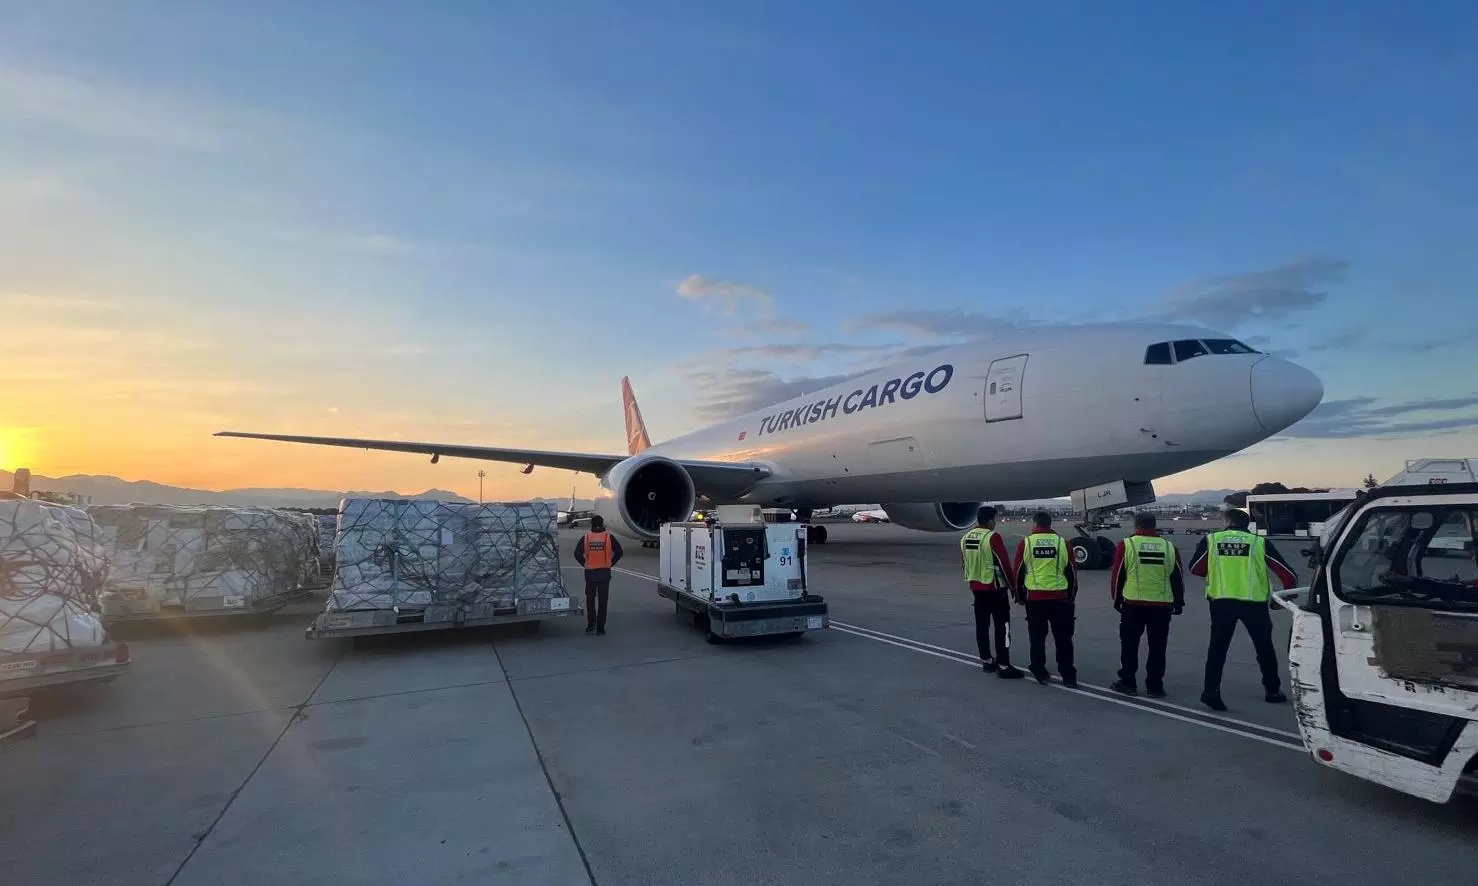 Turkish cargo revenue doubles to $3.7bn from 2019